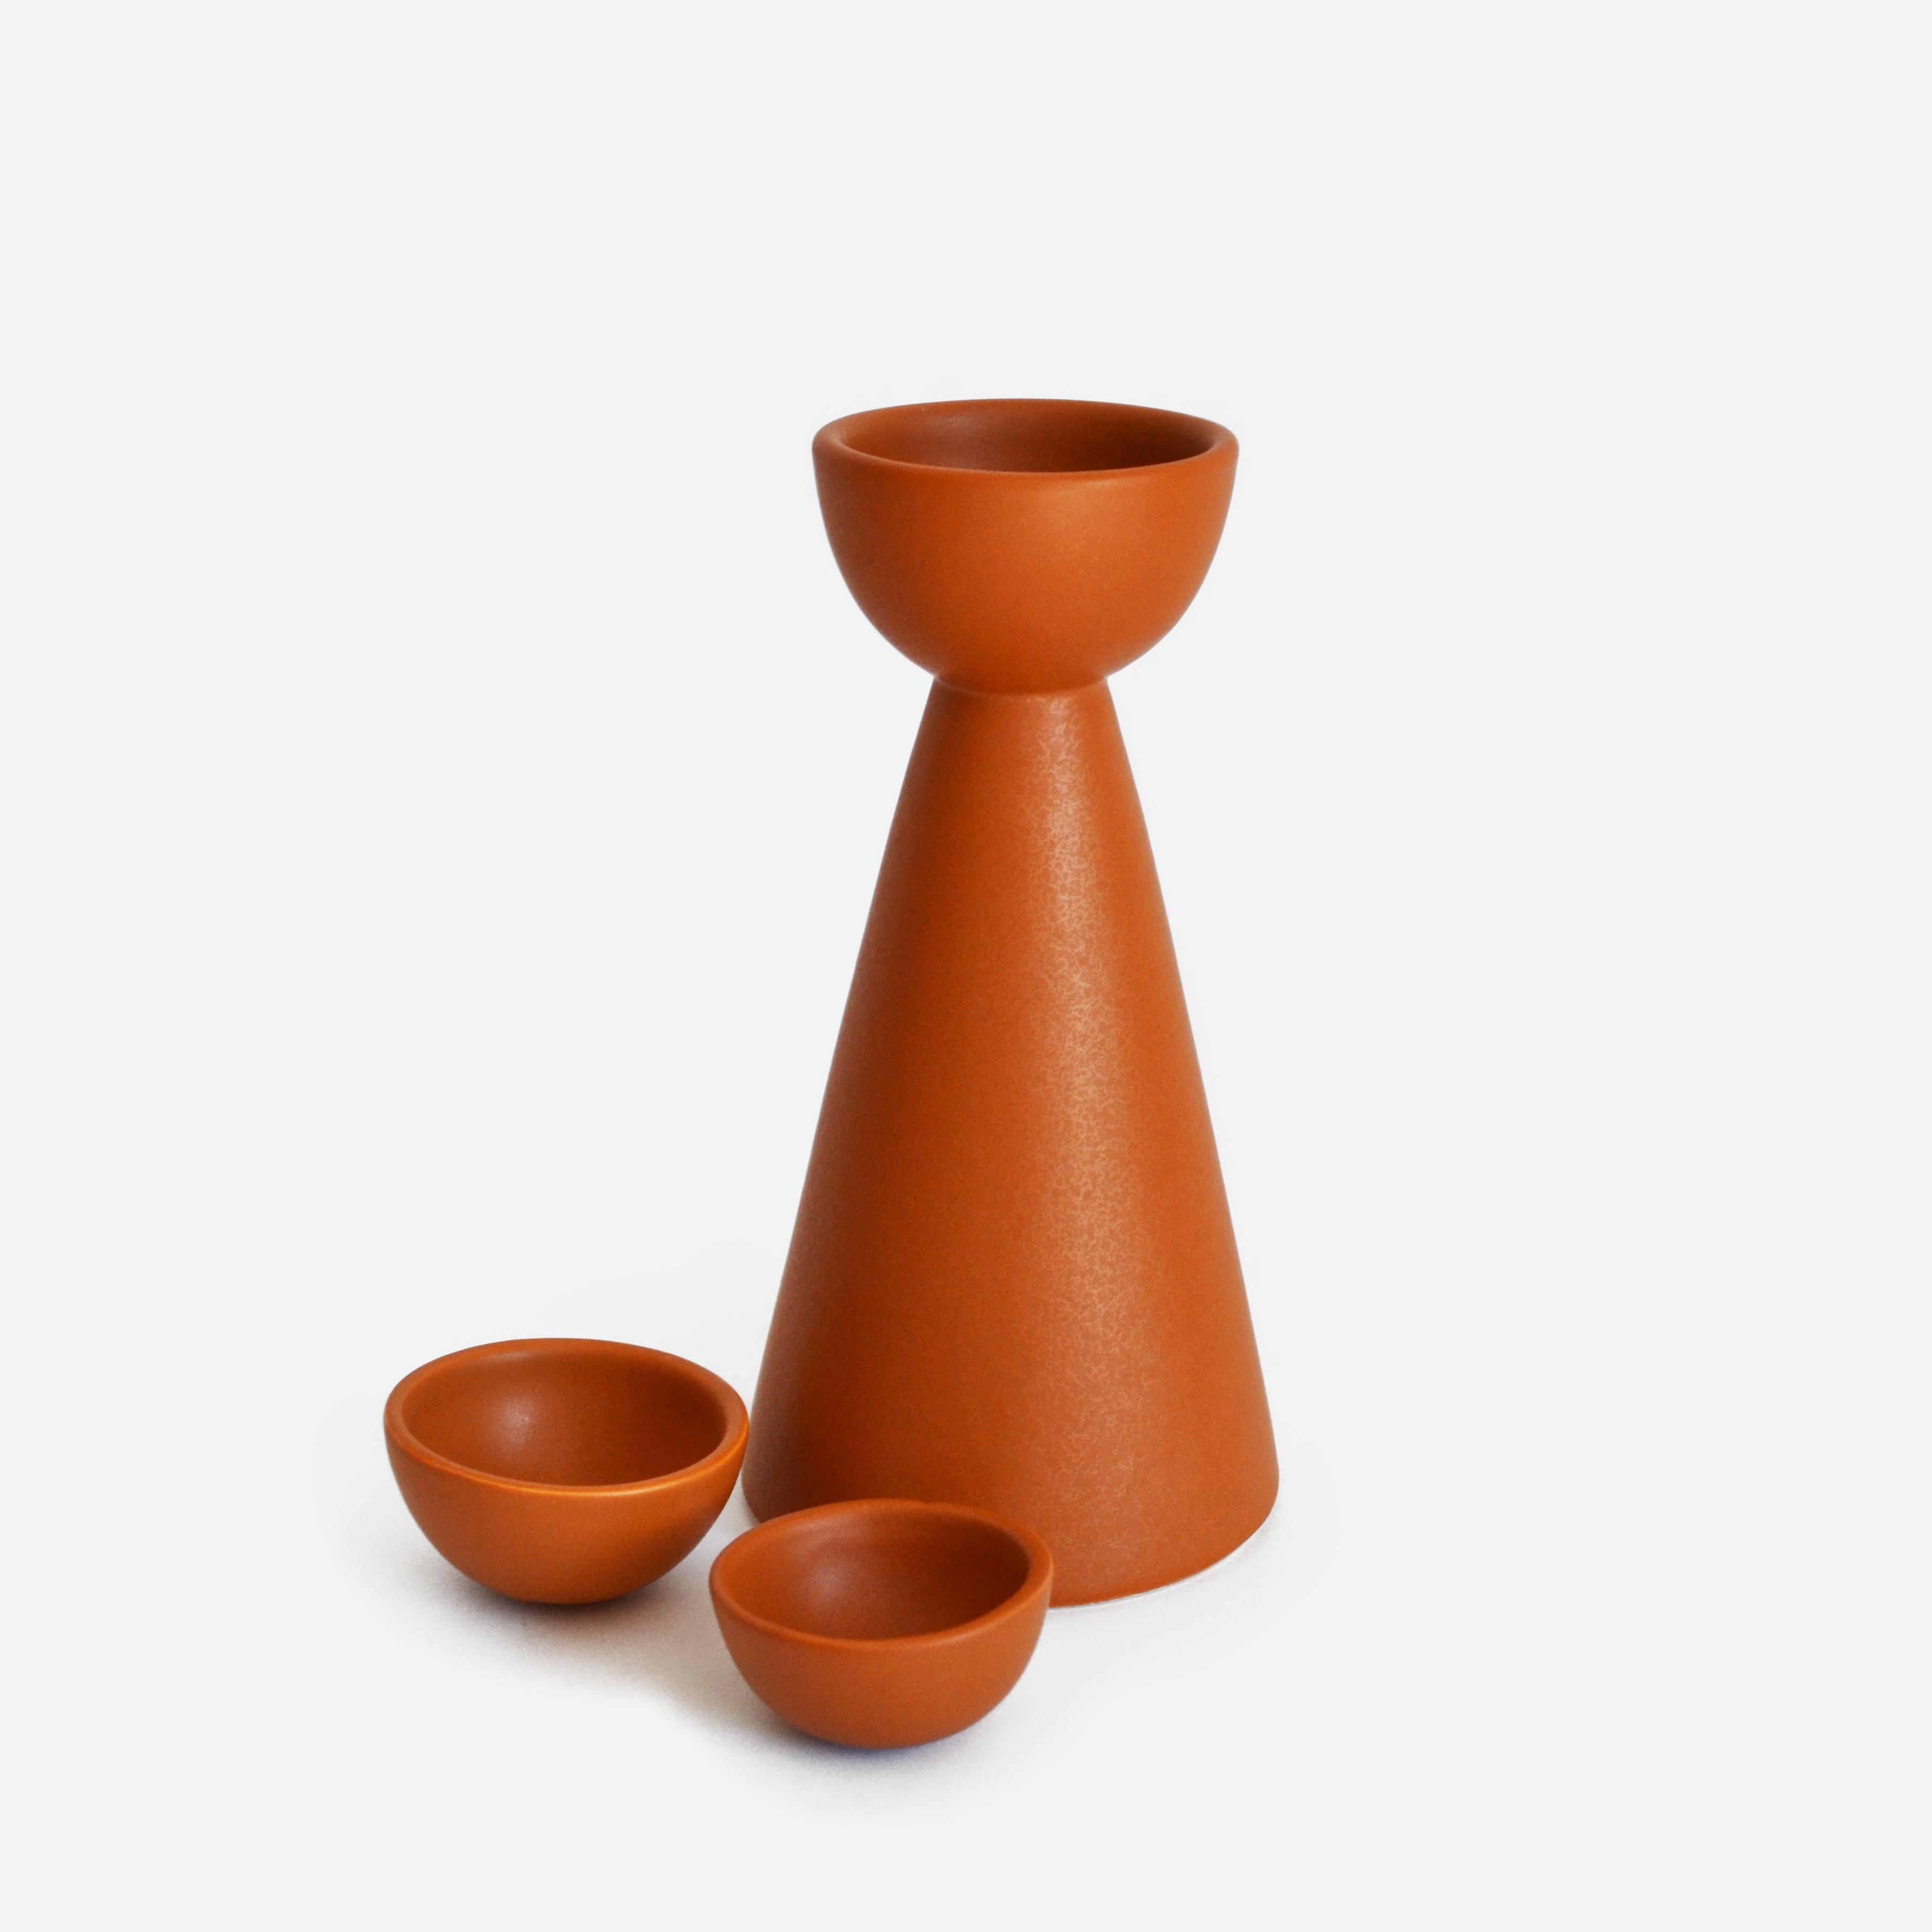 Vernissé Carafe Contemporary Yet Inspired by Traditional Carafes Jug, Pitcher for Mezcal en vente